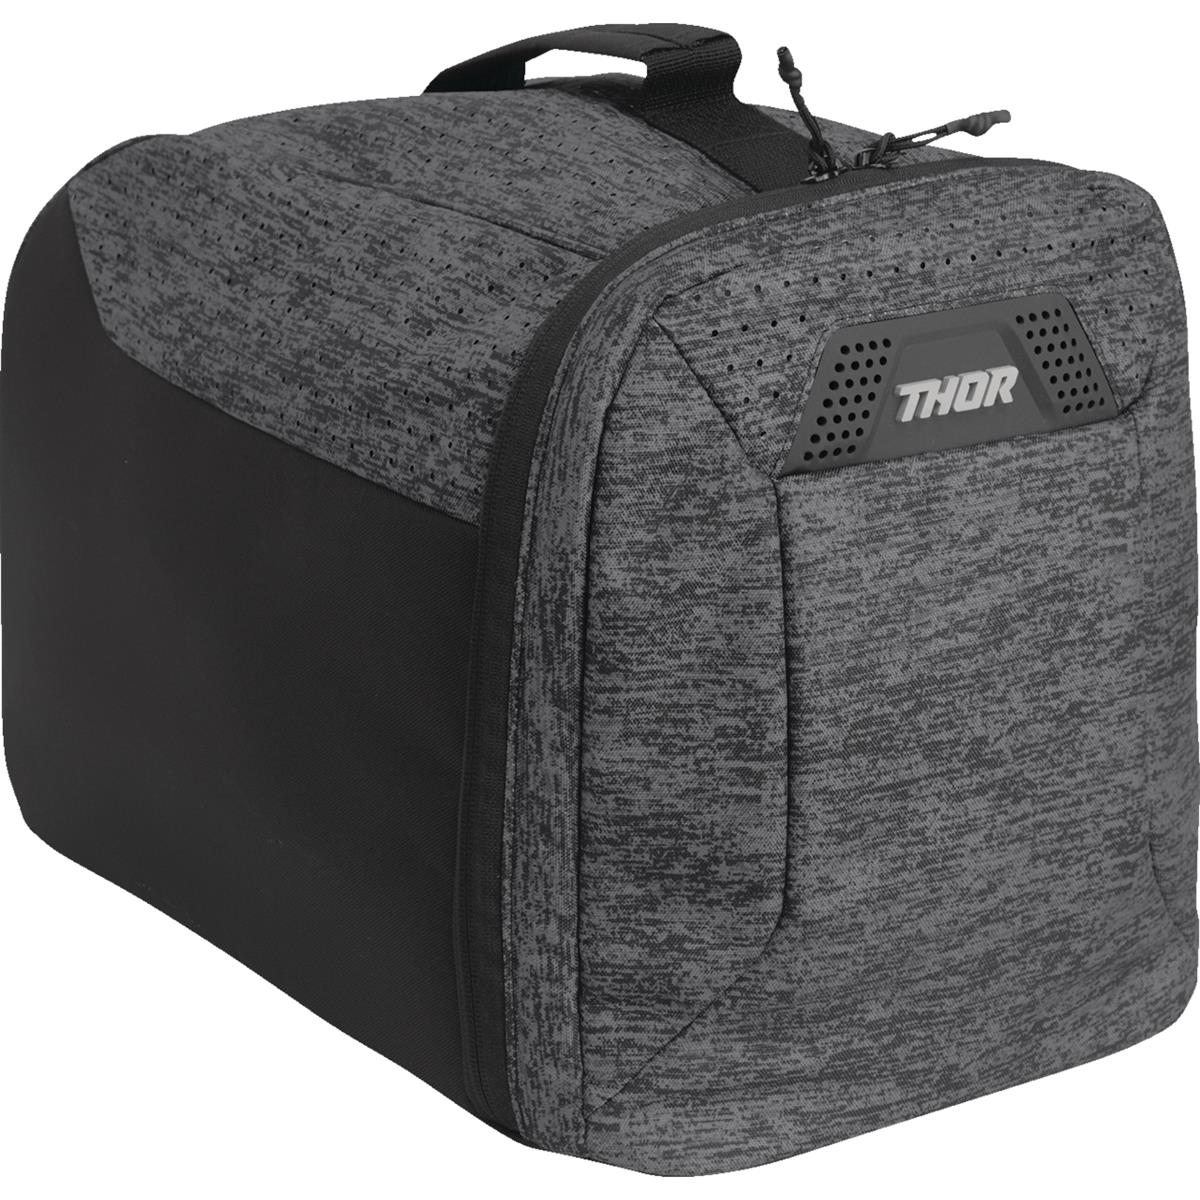 Thor Sac pour Casque  Charcoal/Heather